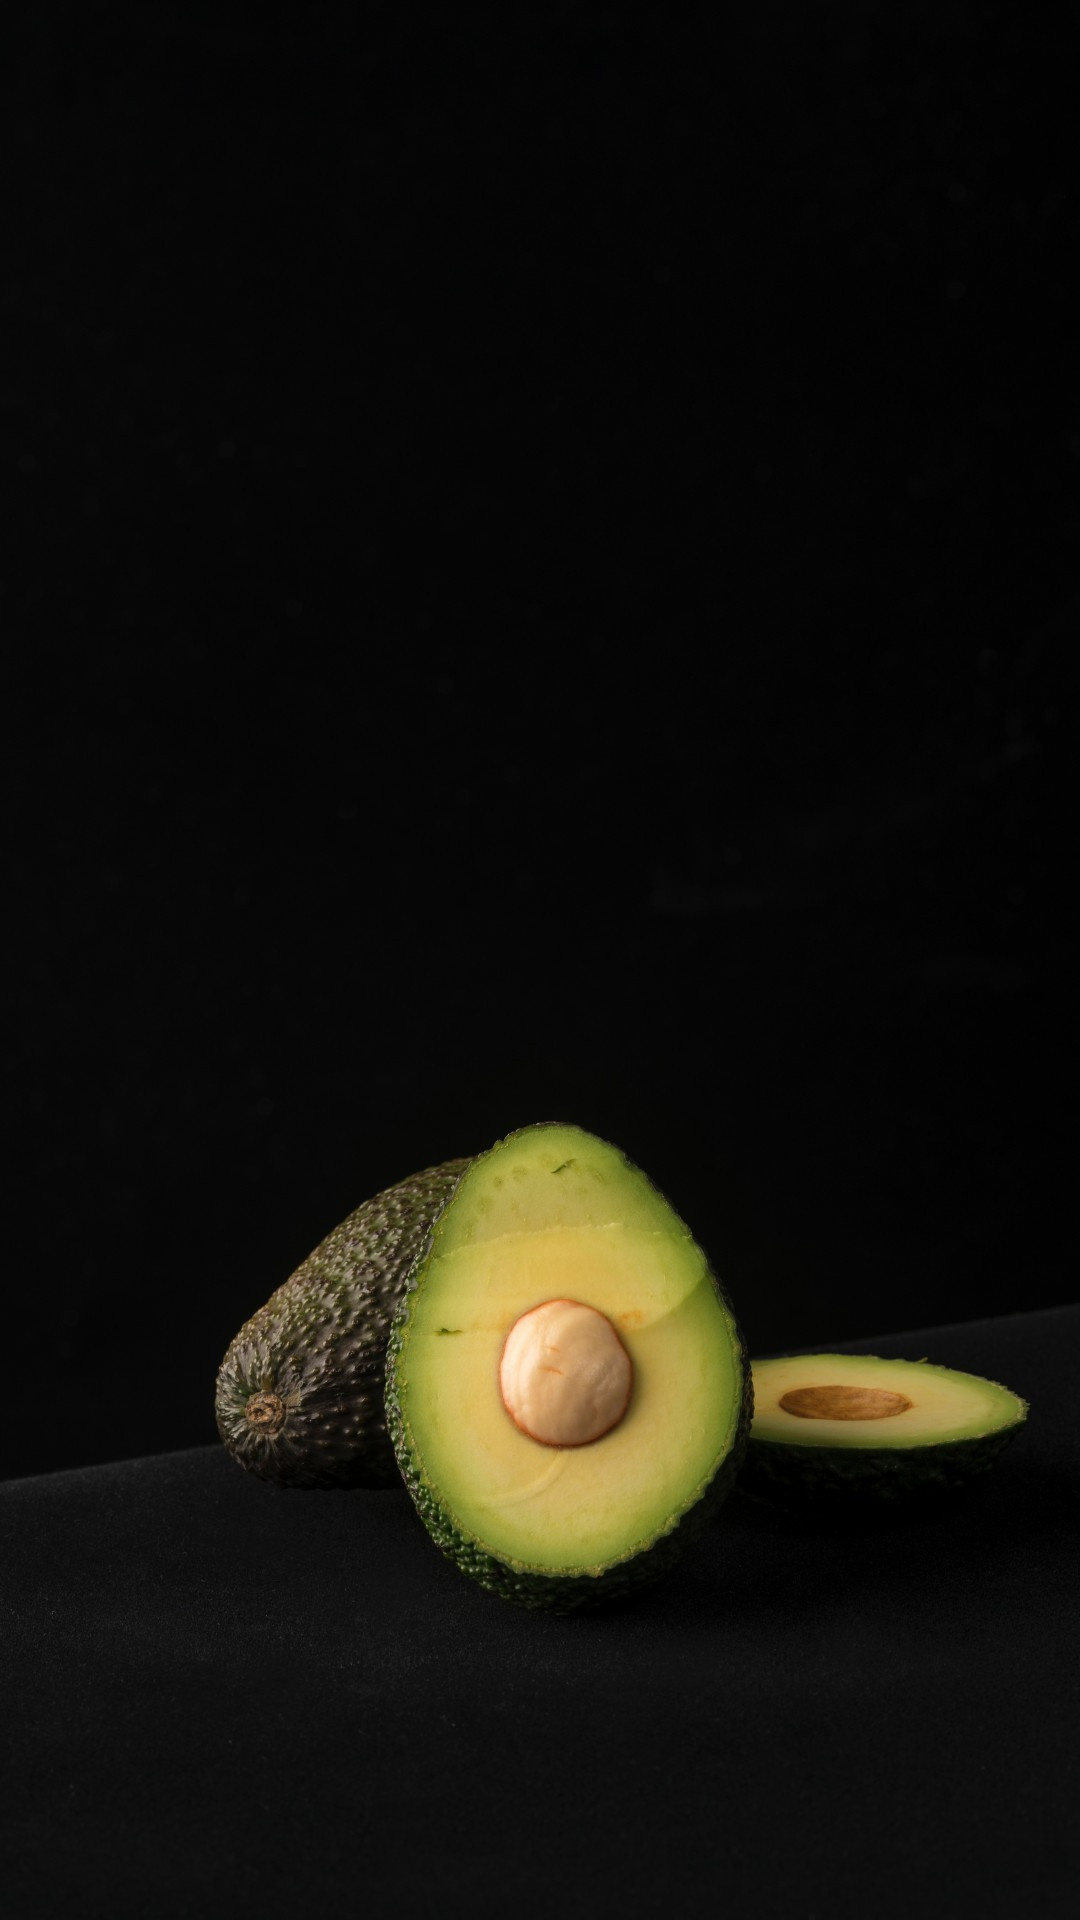 Avocado: Provides nutrients that are essential for the health of the immune system, including vitamins C, B6, and E. 1080x1920 Full HD Wallpaper.